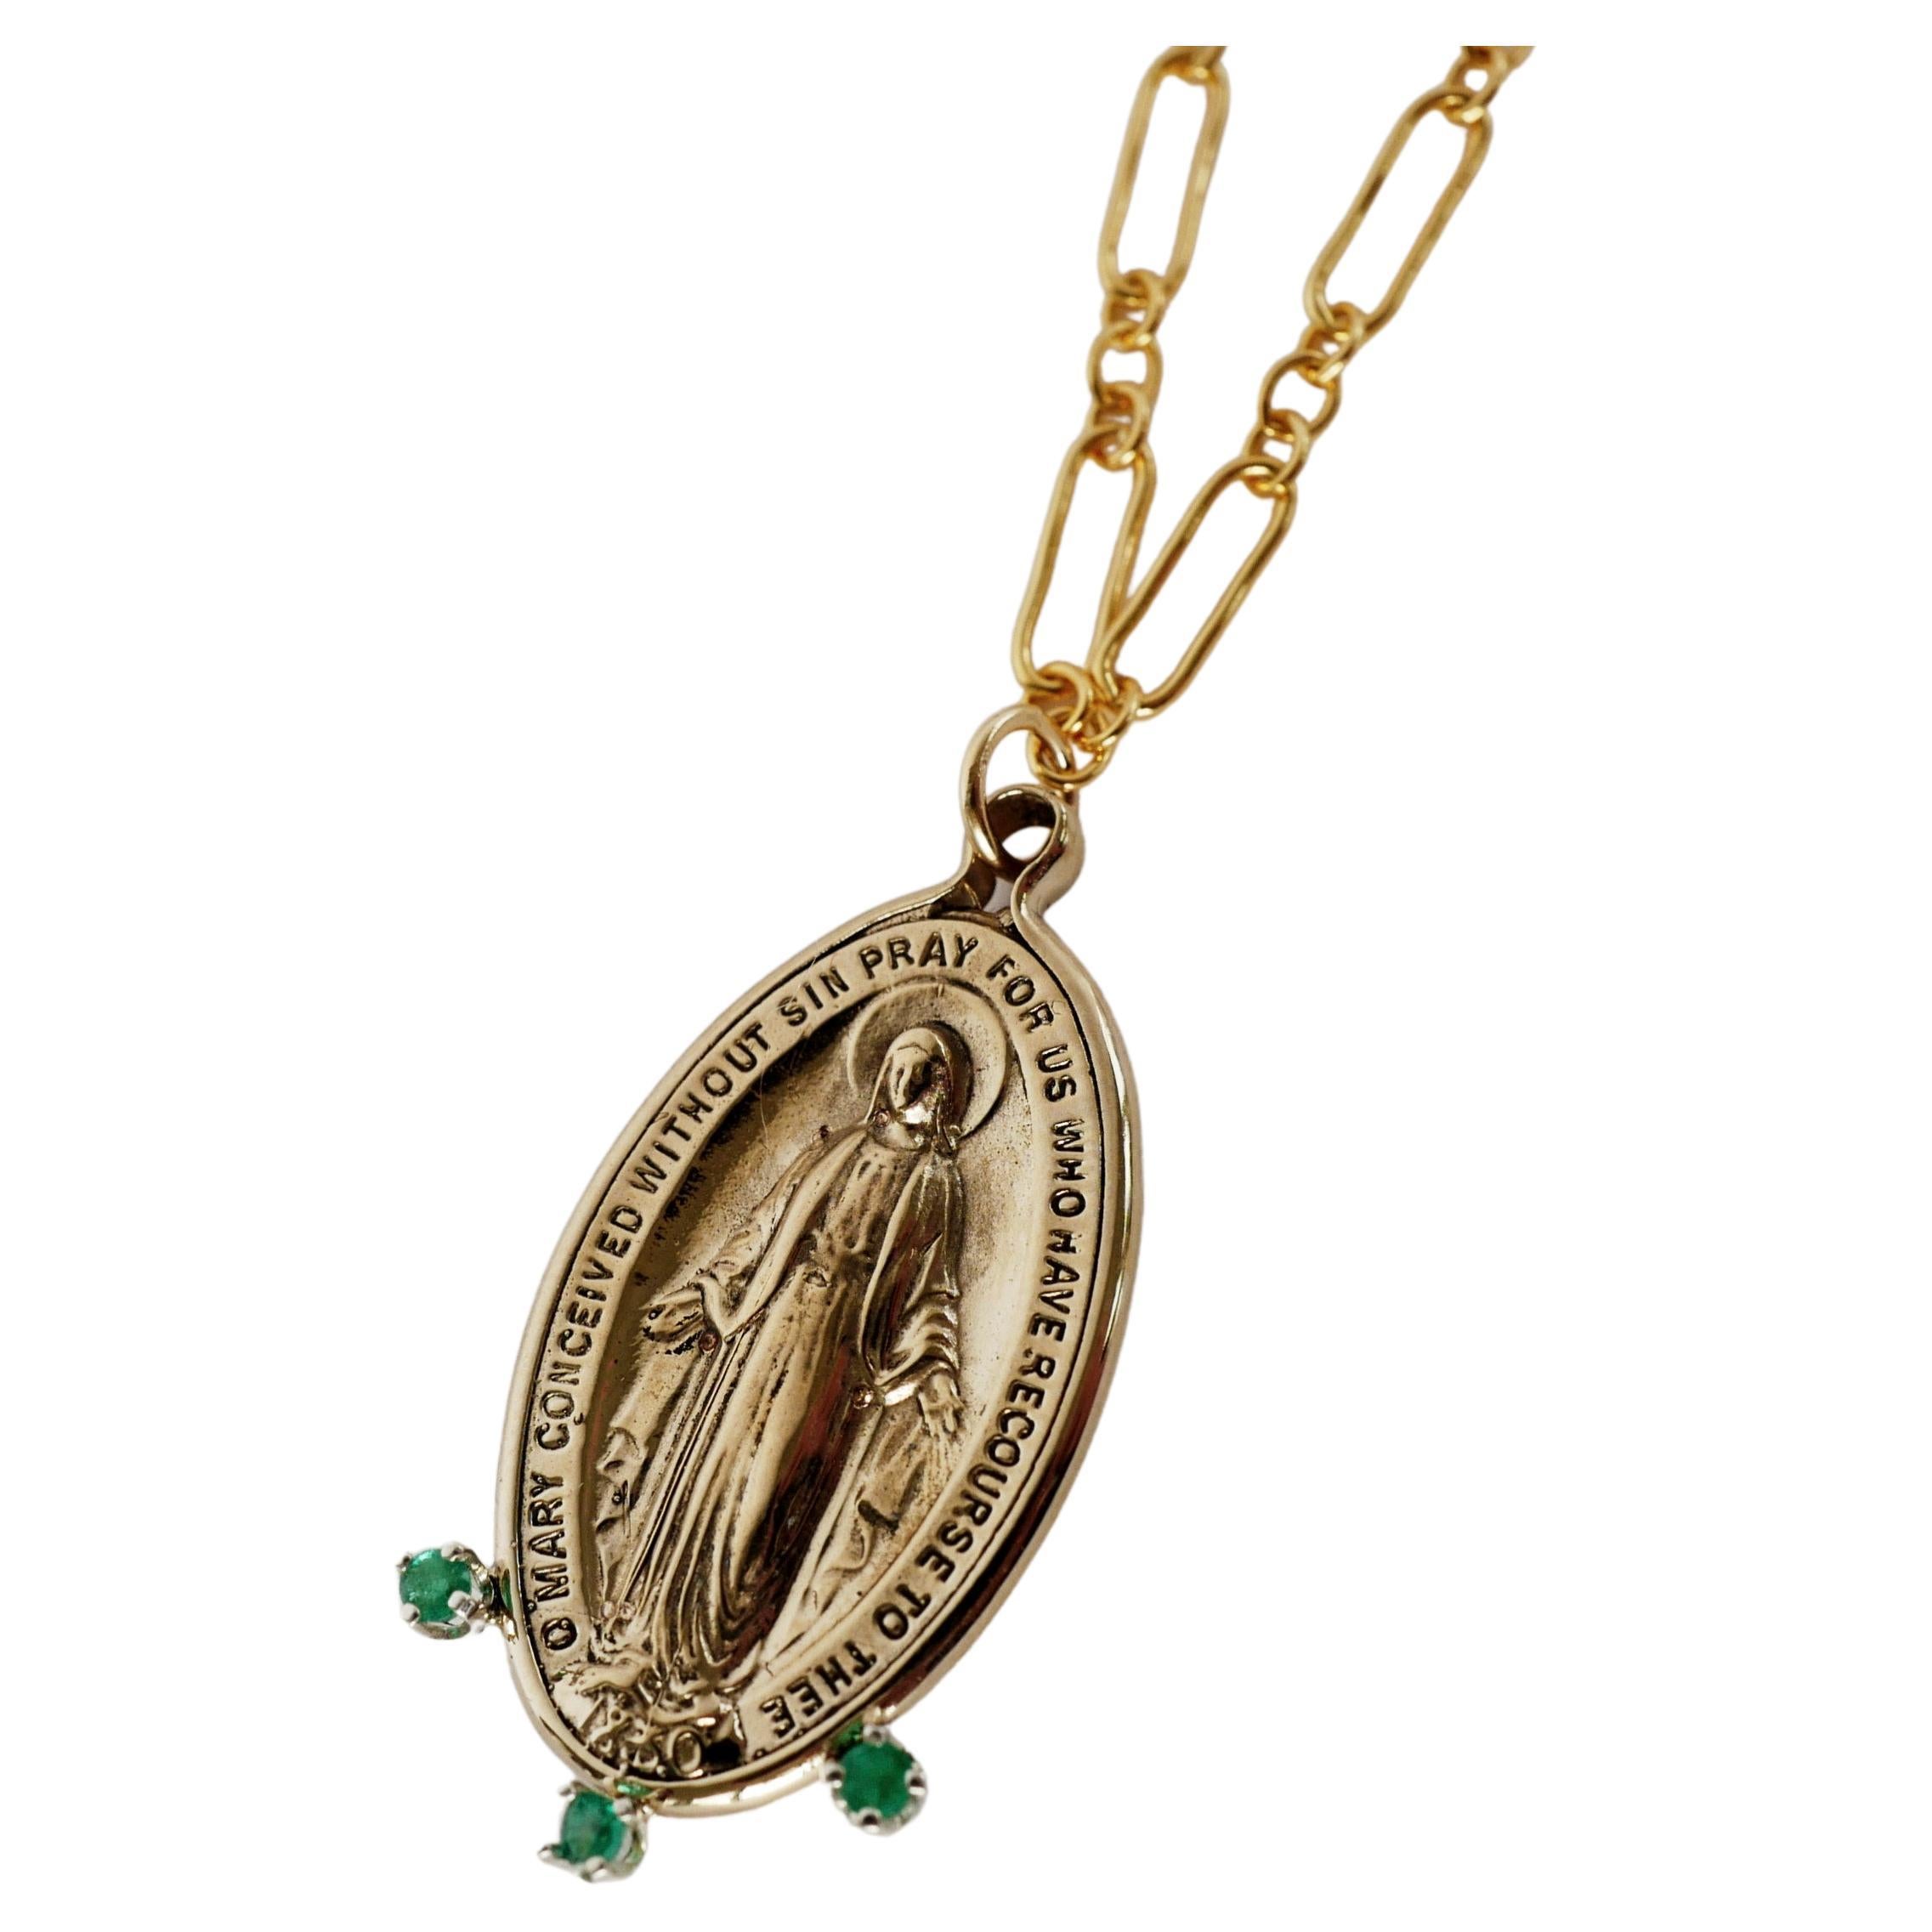 Emerald Virgin Mary Medal Pendant Chain Necklace J Dauphin For Sale